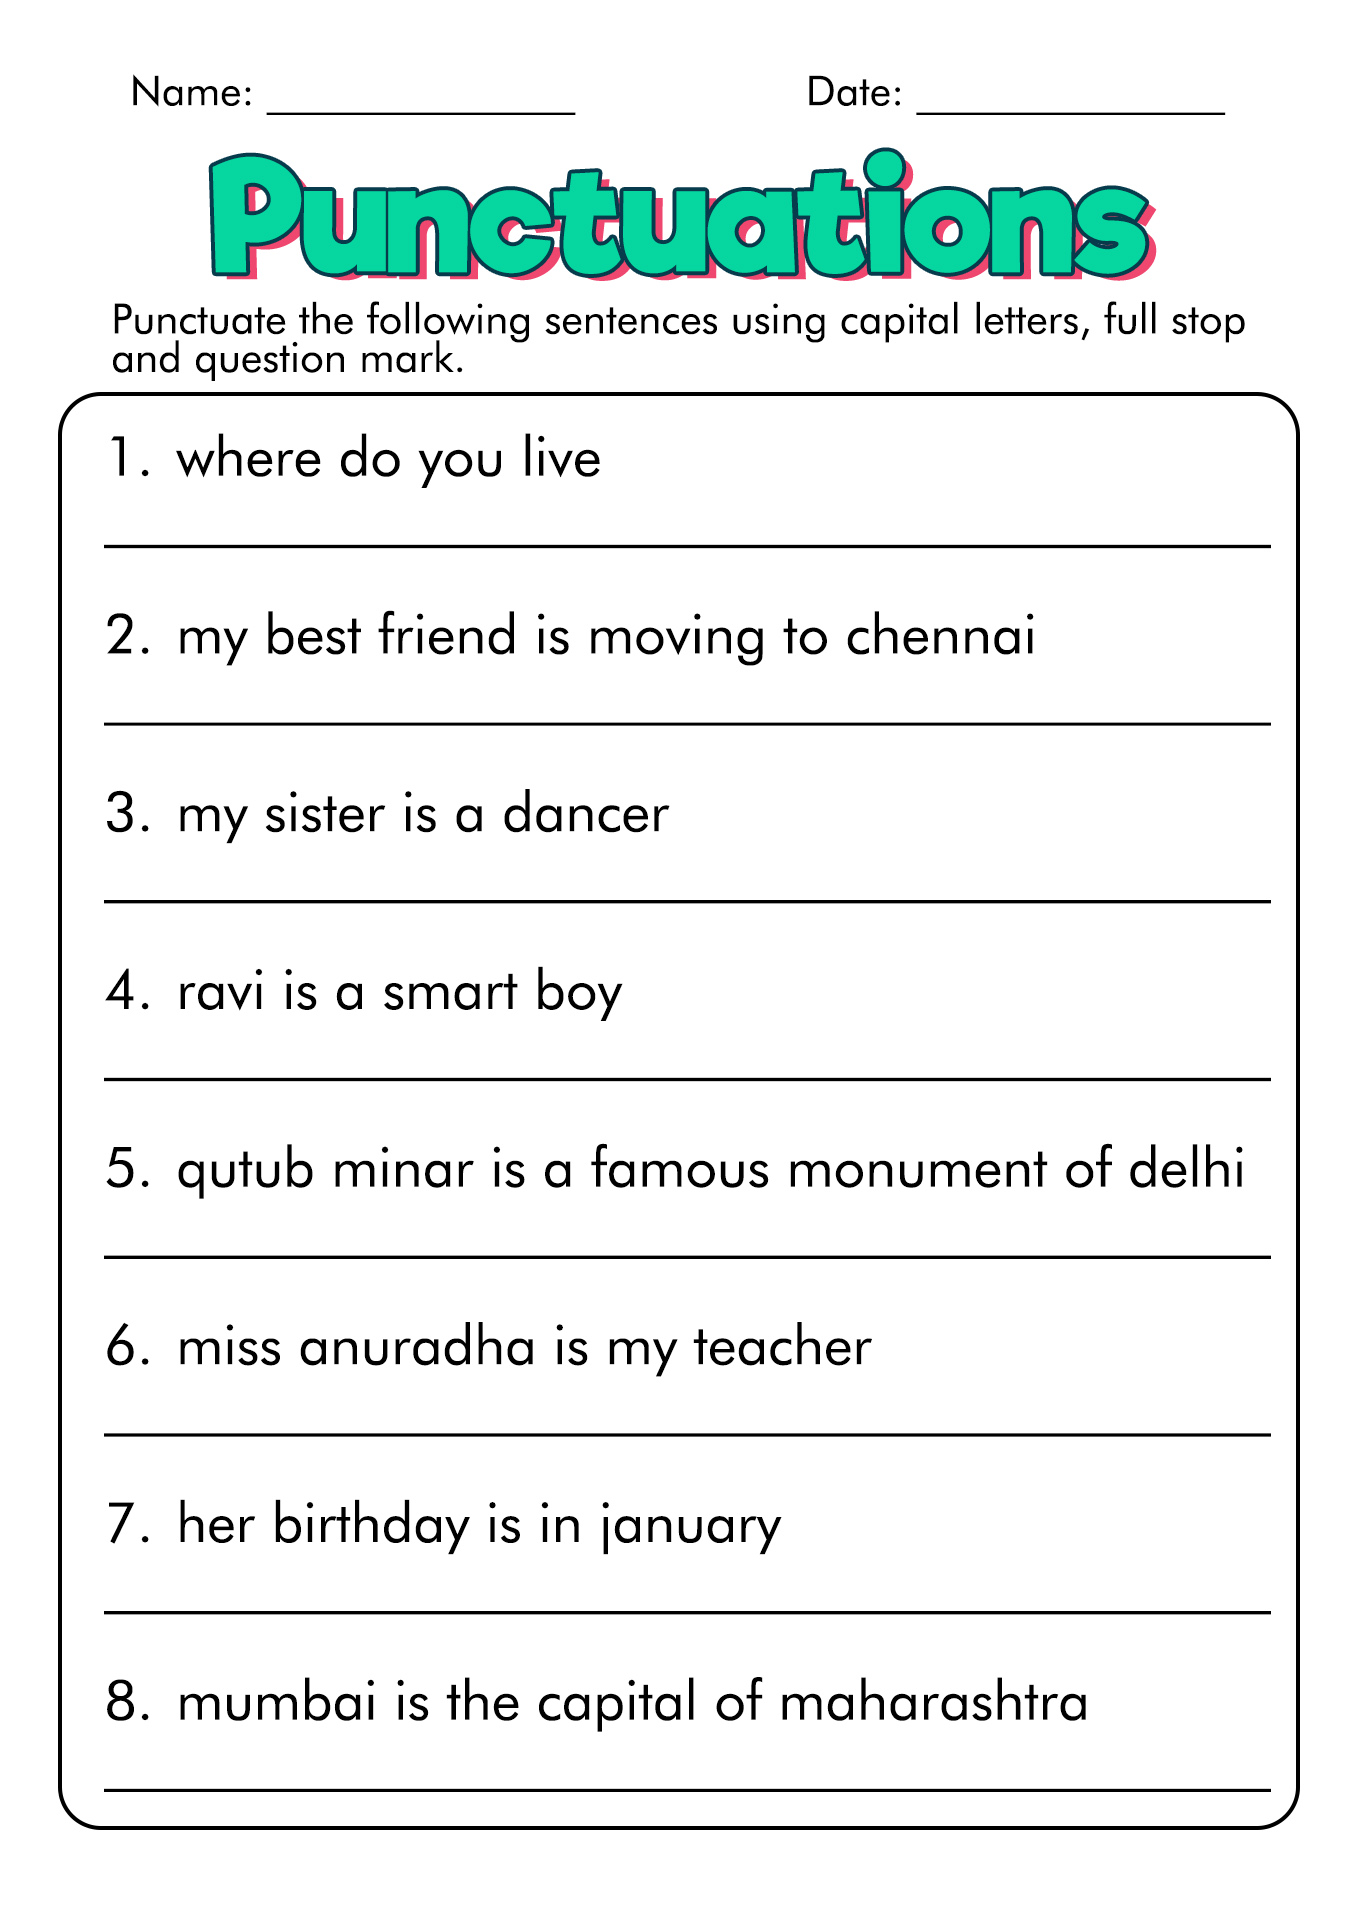 20 Best Images of Punctuation Worksheets For Grade 5 - 5th Grade